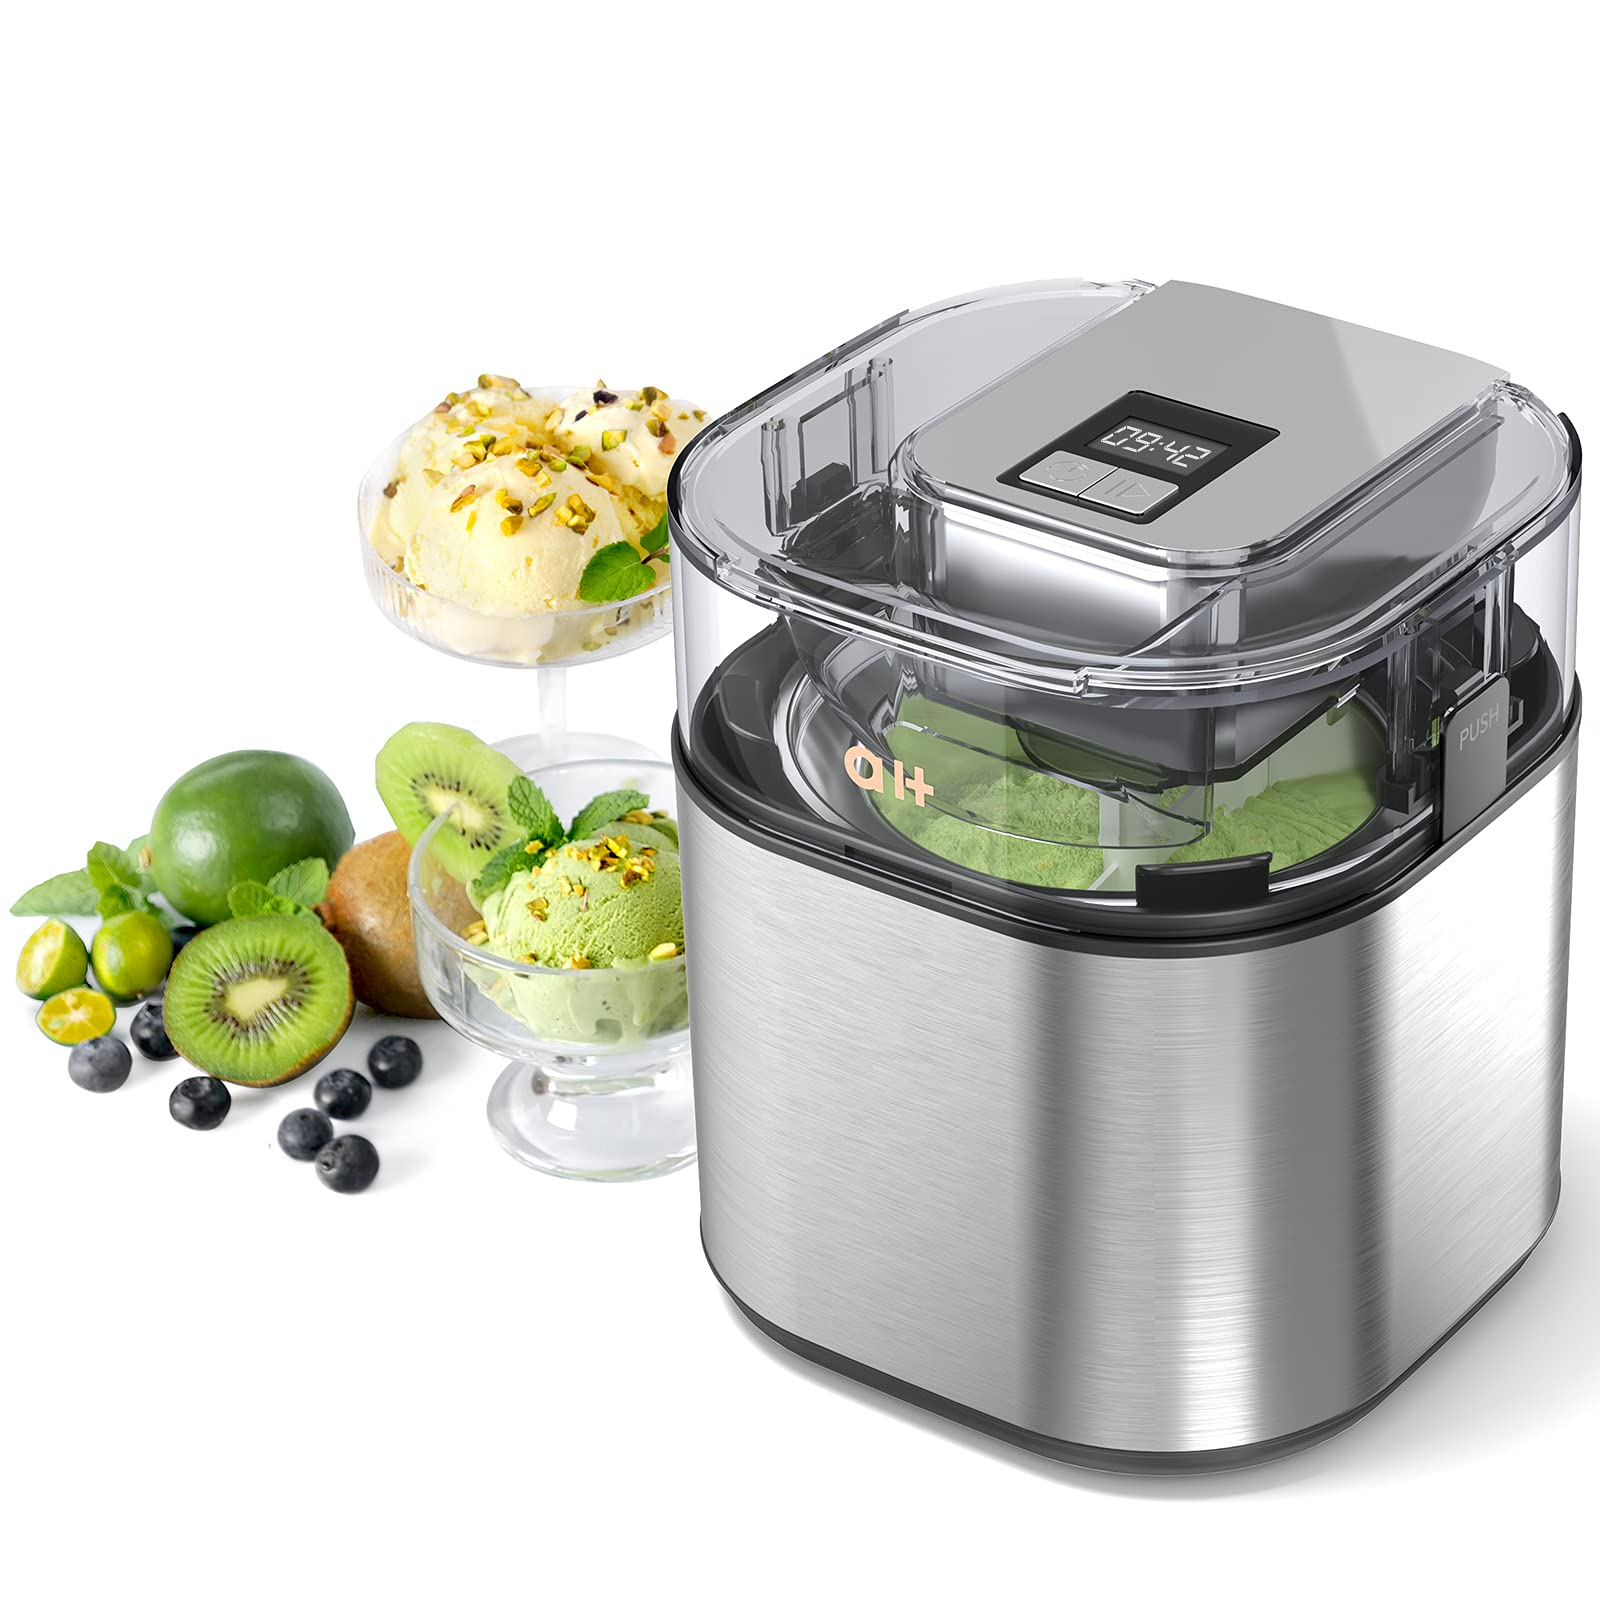 Load image into Gallery viewer, Ice Cream Maker Automatic Easy Homemade Electric Frozen Yogurt, Sorbet, Ice Cream Machine 1.5L Capacity with LCD Digital Display,  Healthy Homemade DIY Food, Silver
